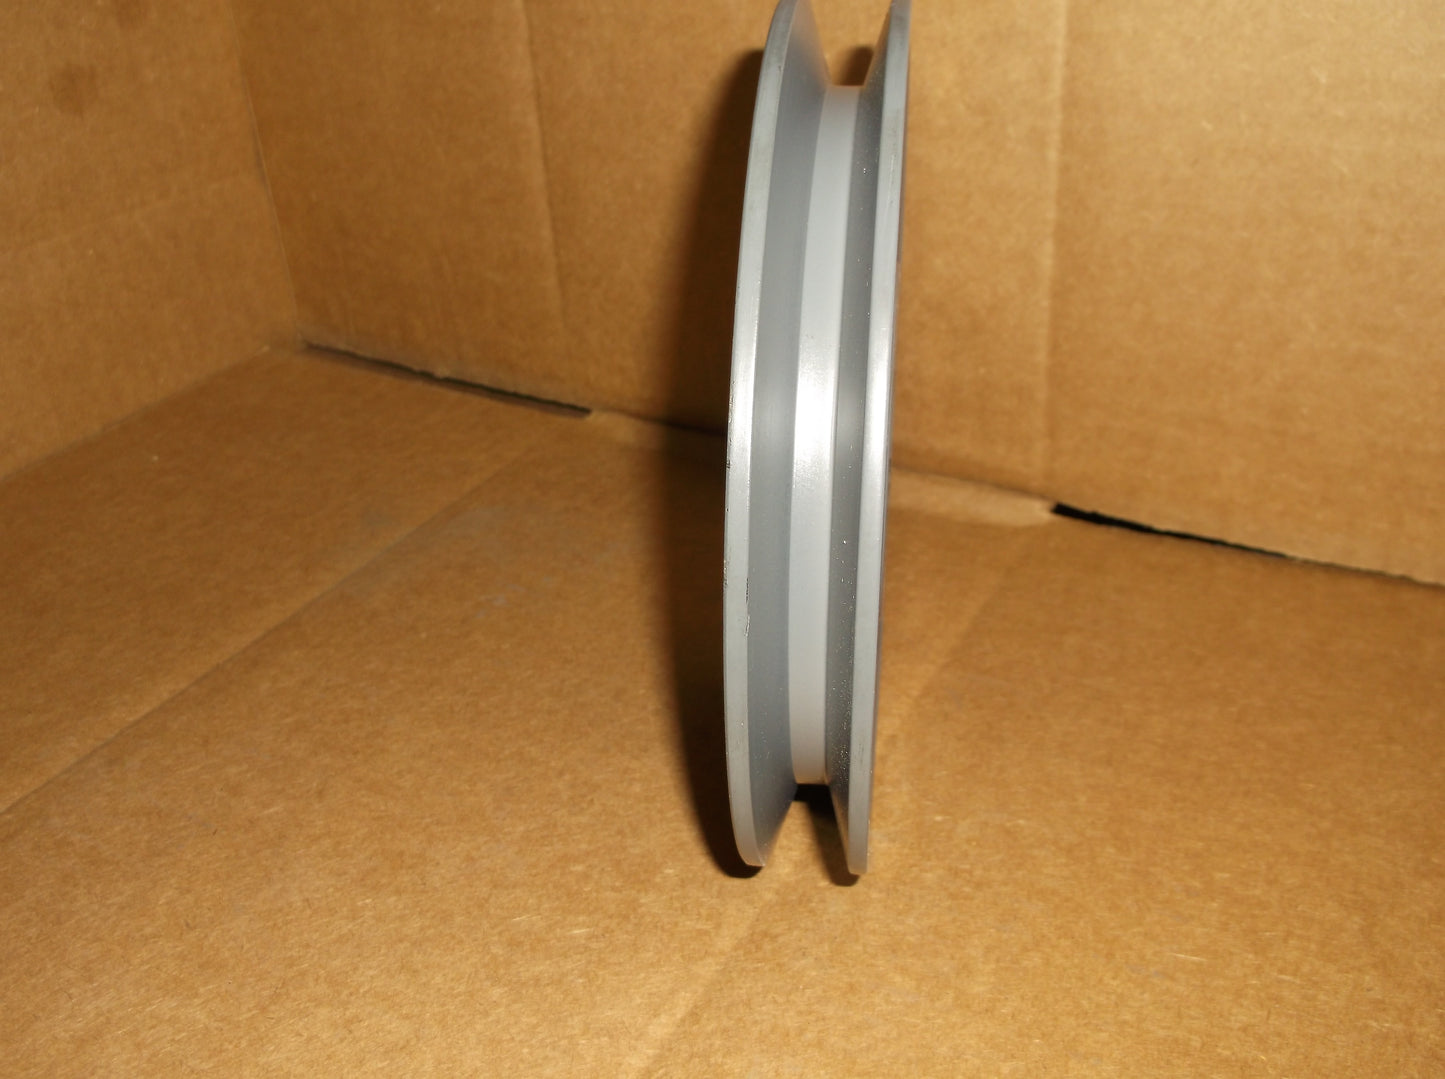 6-1/2" DIAMETER FIXED SINGLE GROOVE PULLEY.LESS "H" STYLE BUSHING FOR BORE